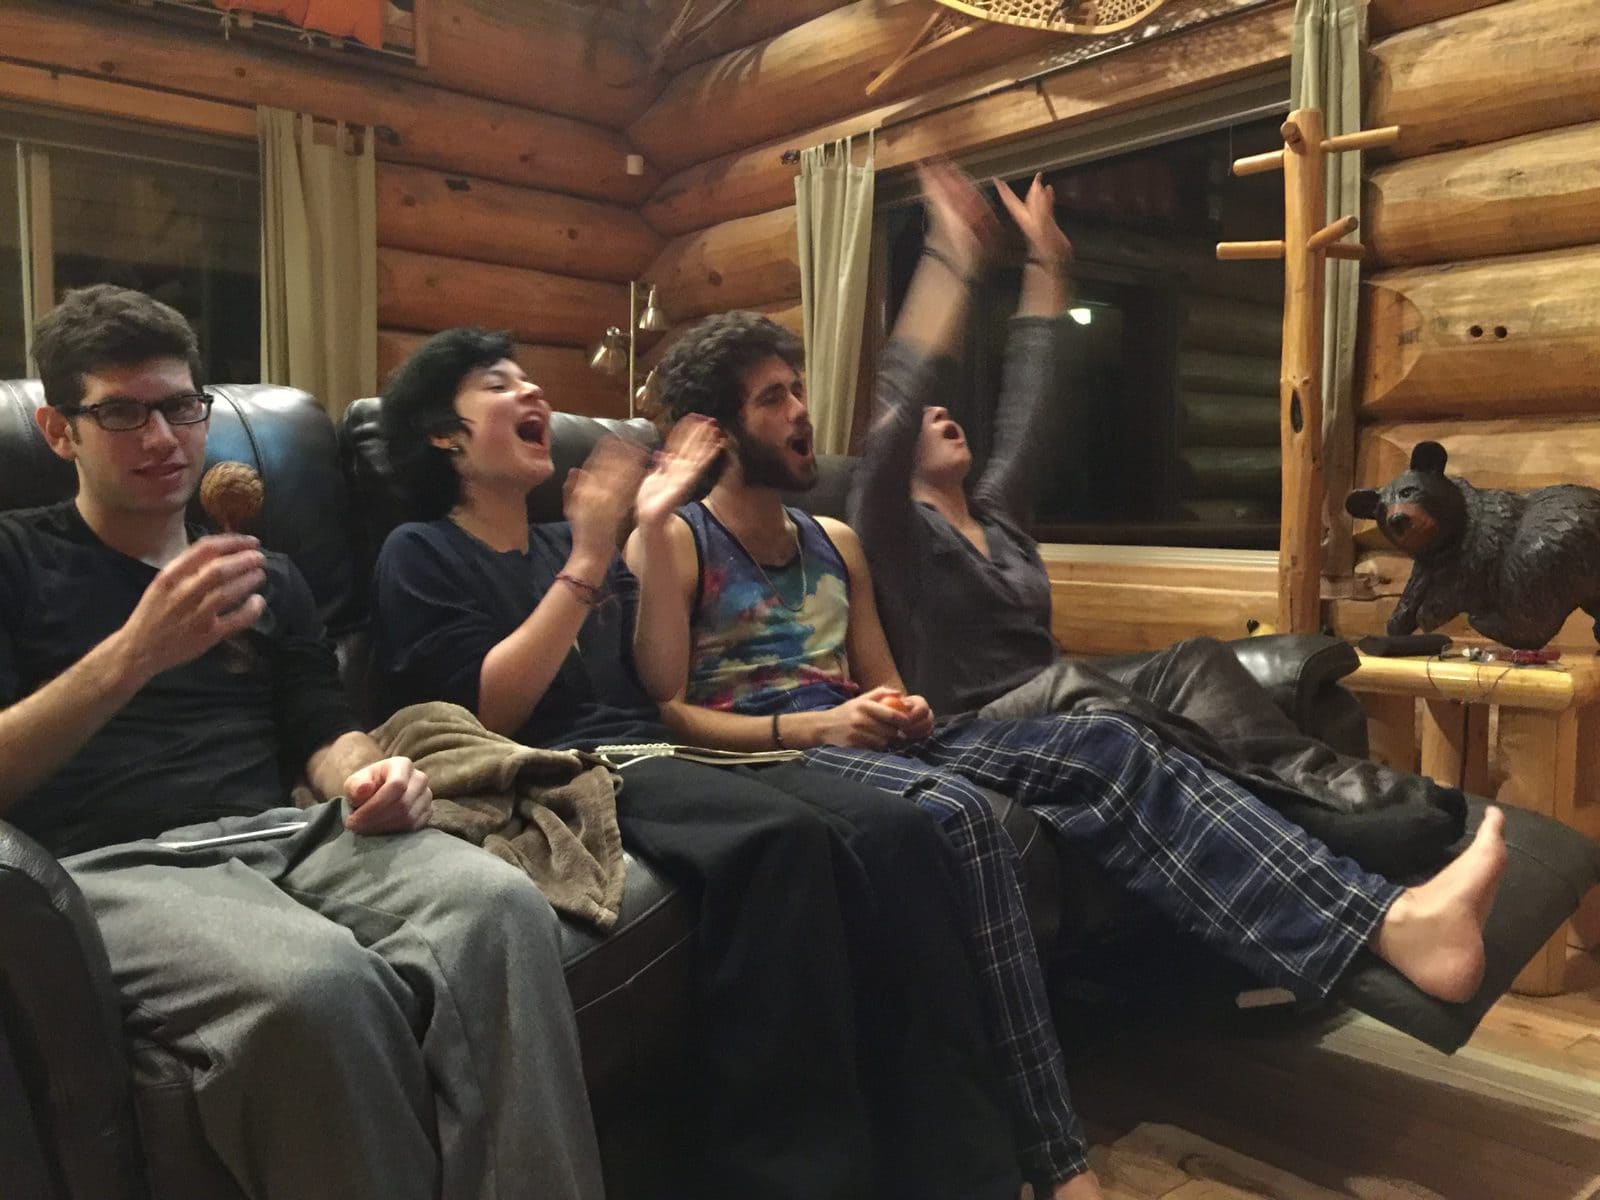 The crowd goes wild at our cozy cabin karaoke night.